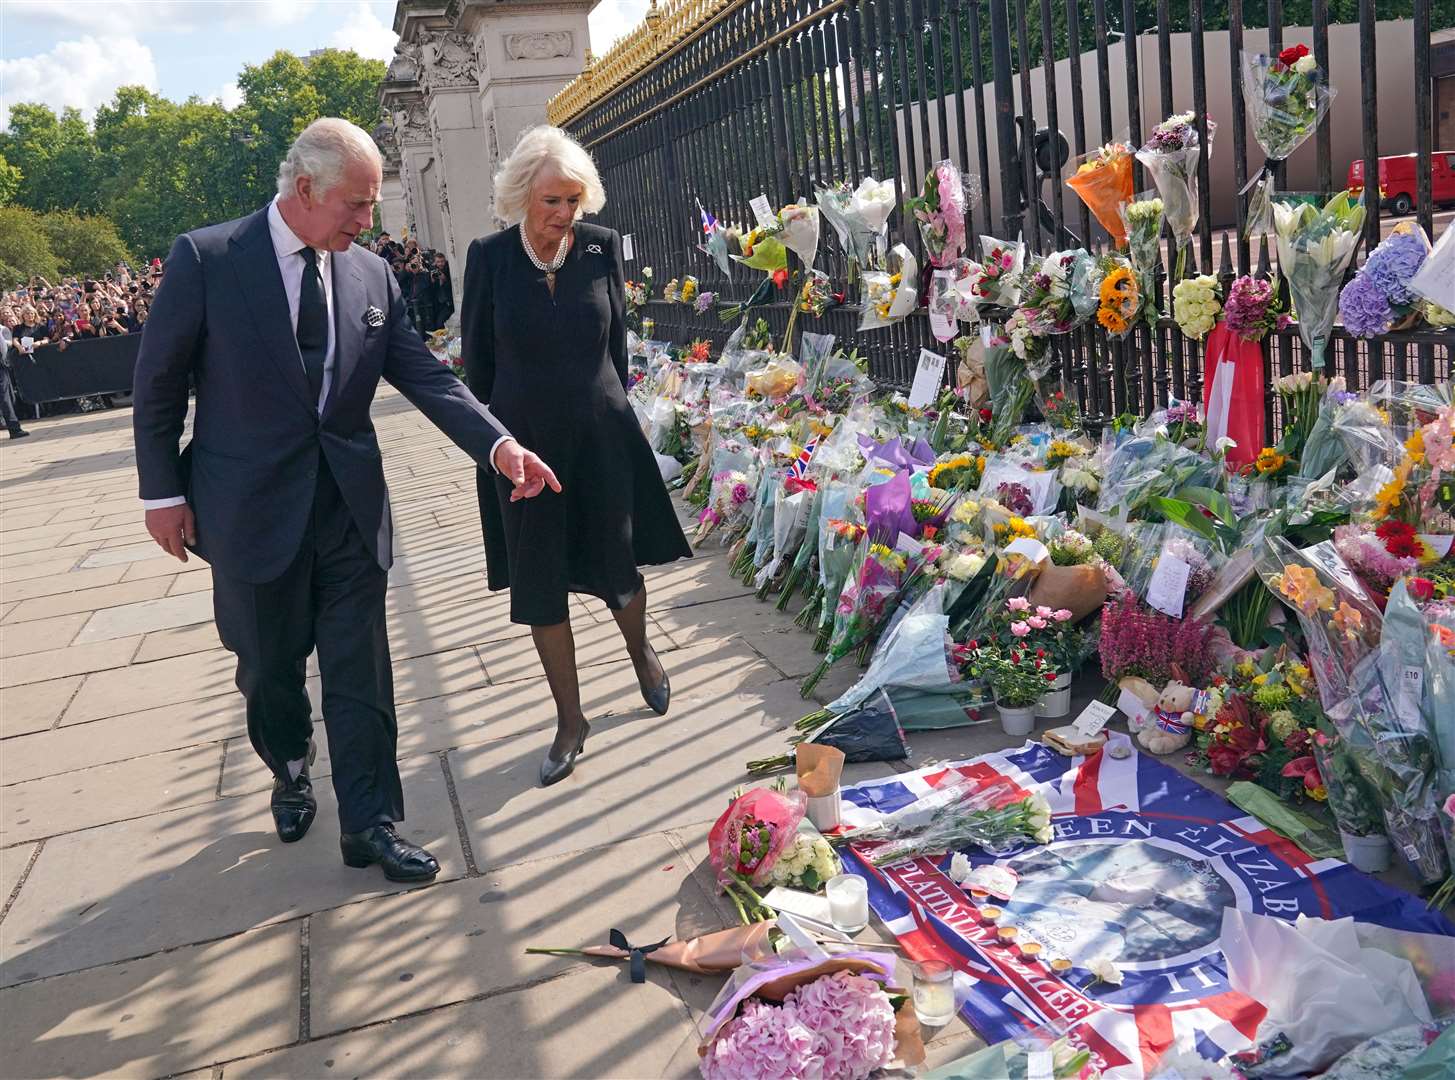 King Charles III and the Queen view tributes left outside Buckingham Palace (Yui Mok/PA)